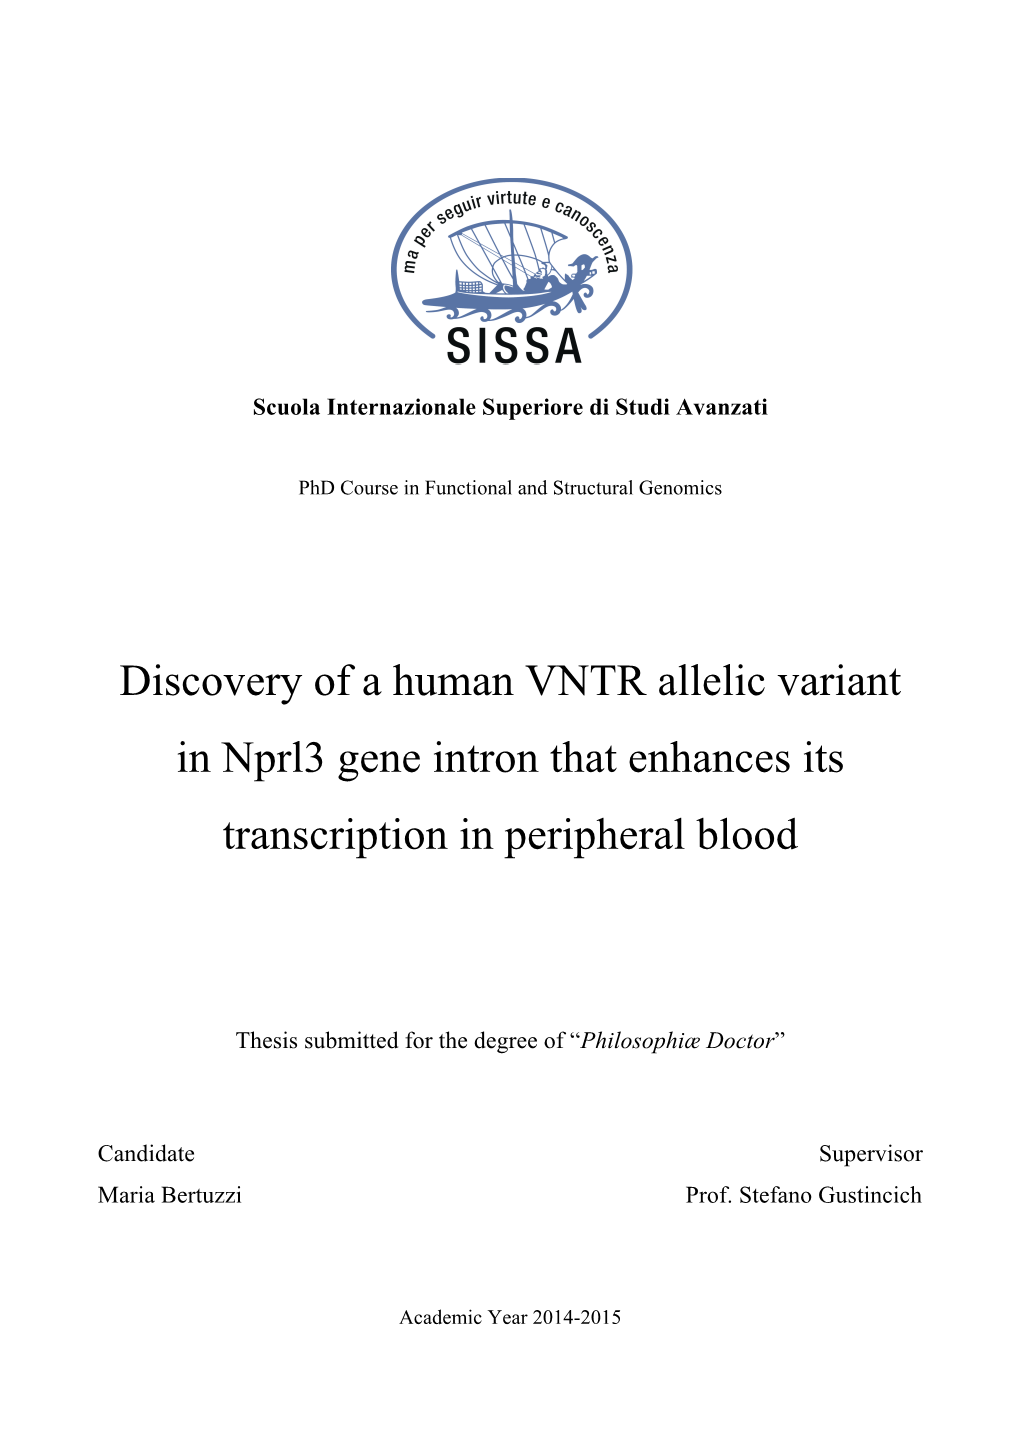 Nprl3 Gene Intron That Enhances Its Transcription in Peripheral Blood